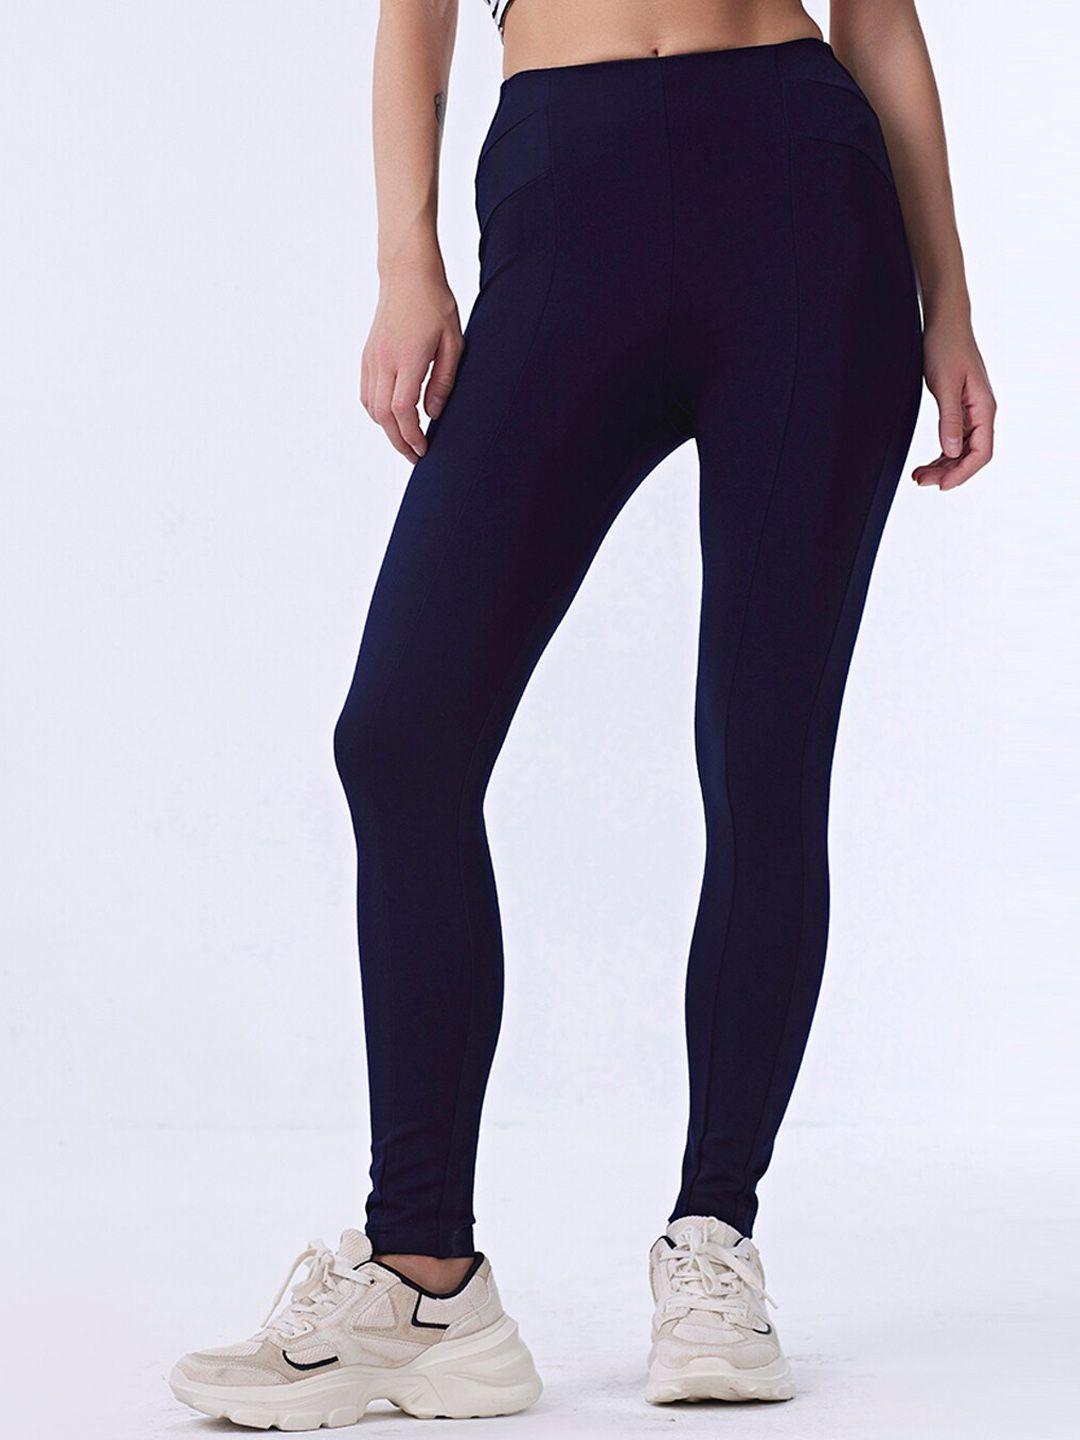 cover story women navy blue mid rise slim fit tights